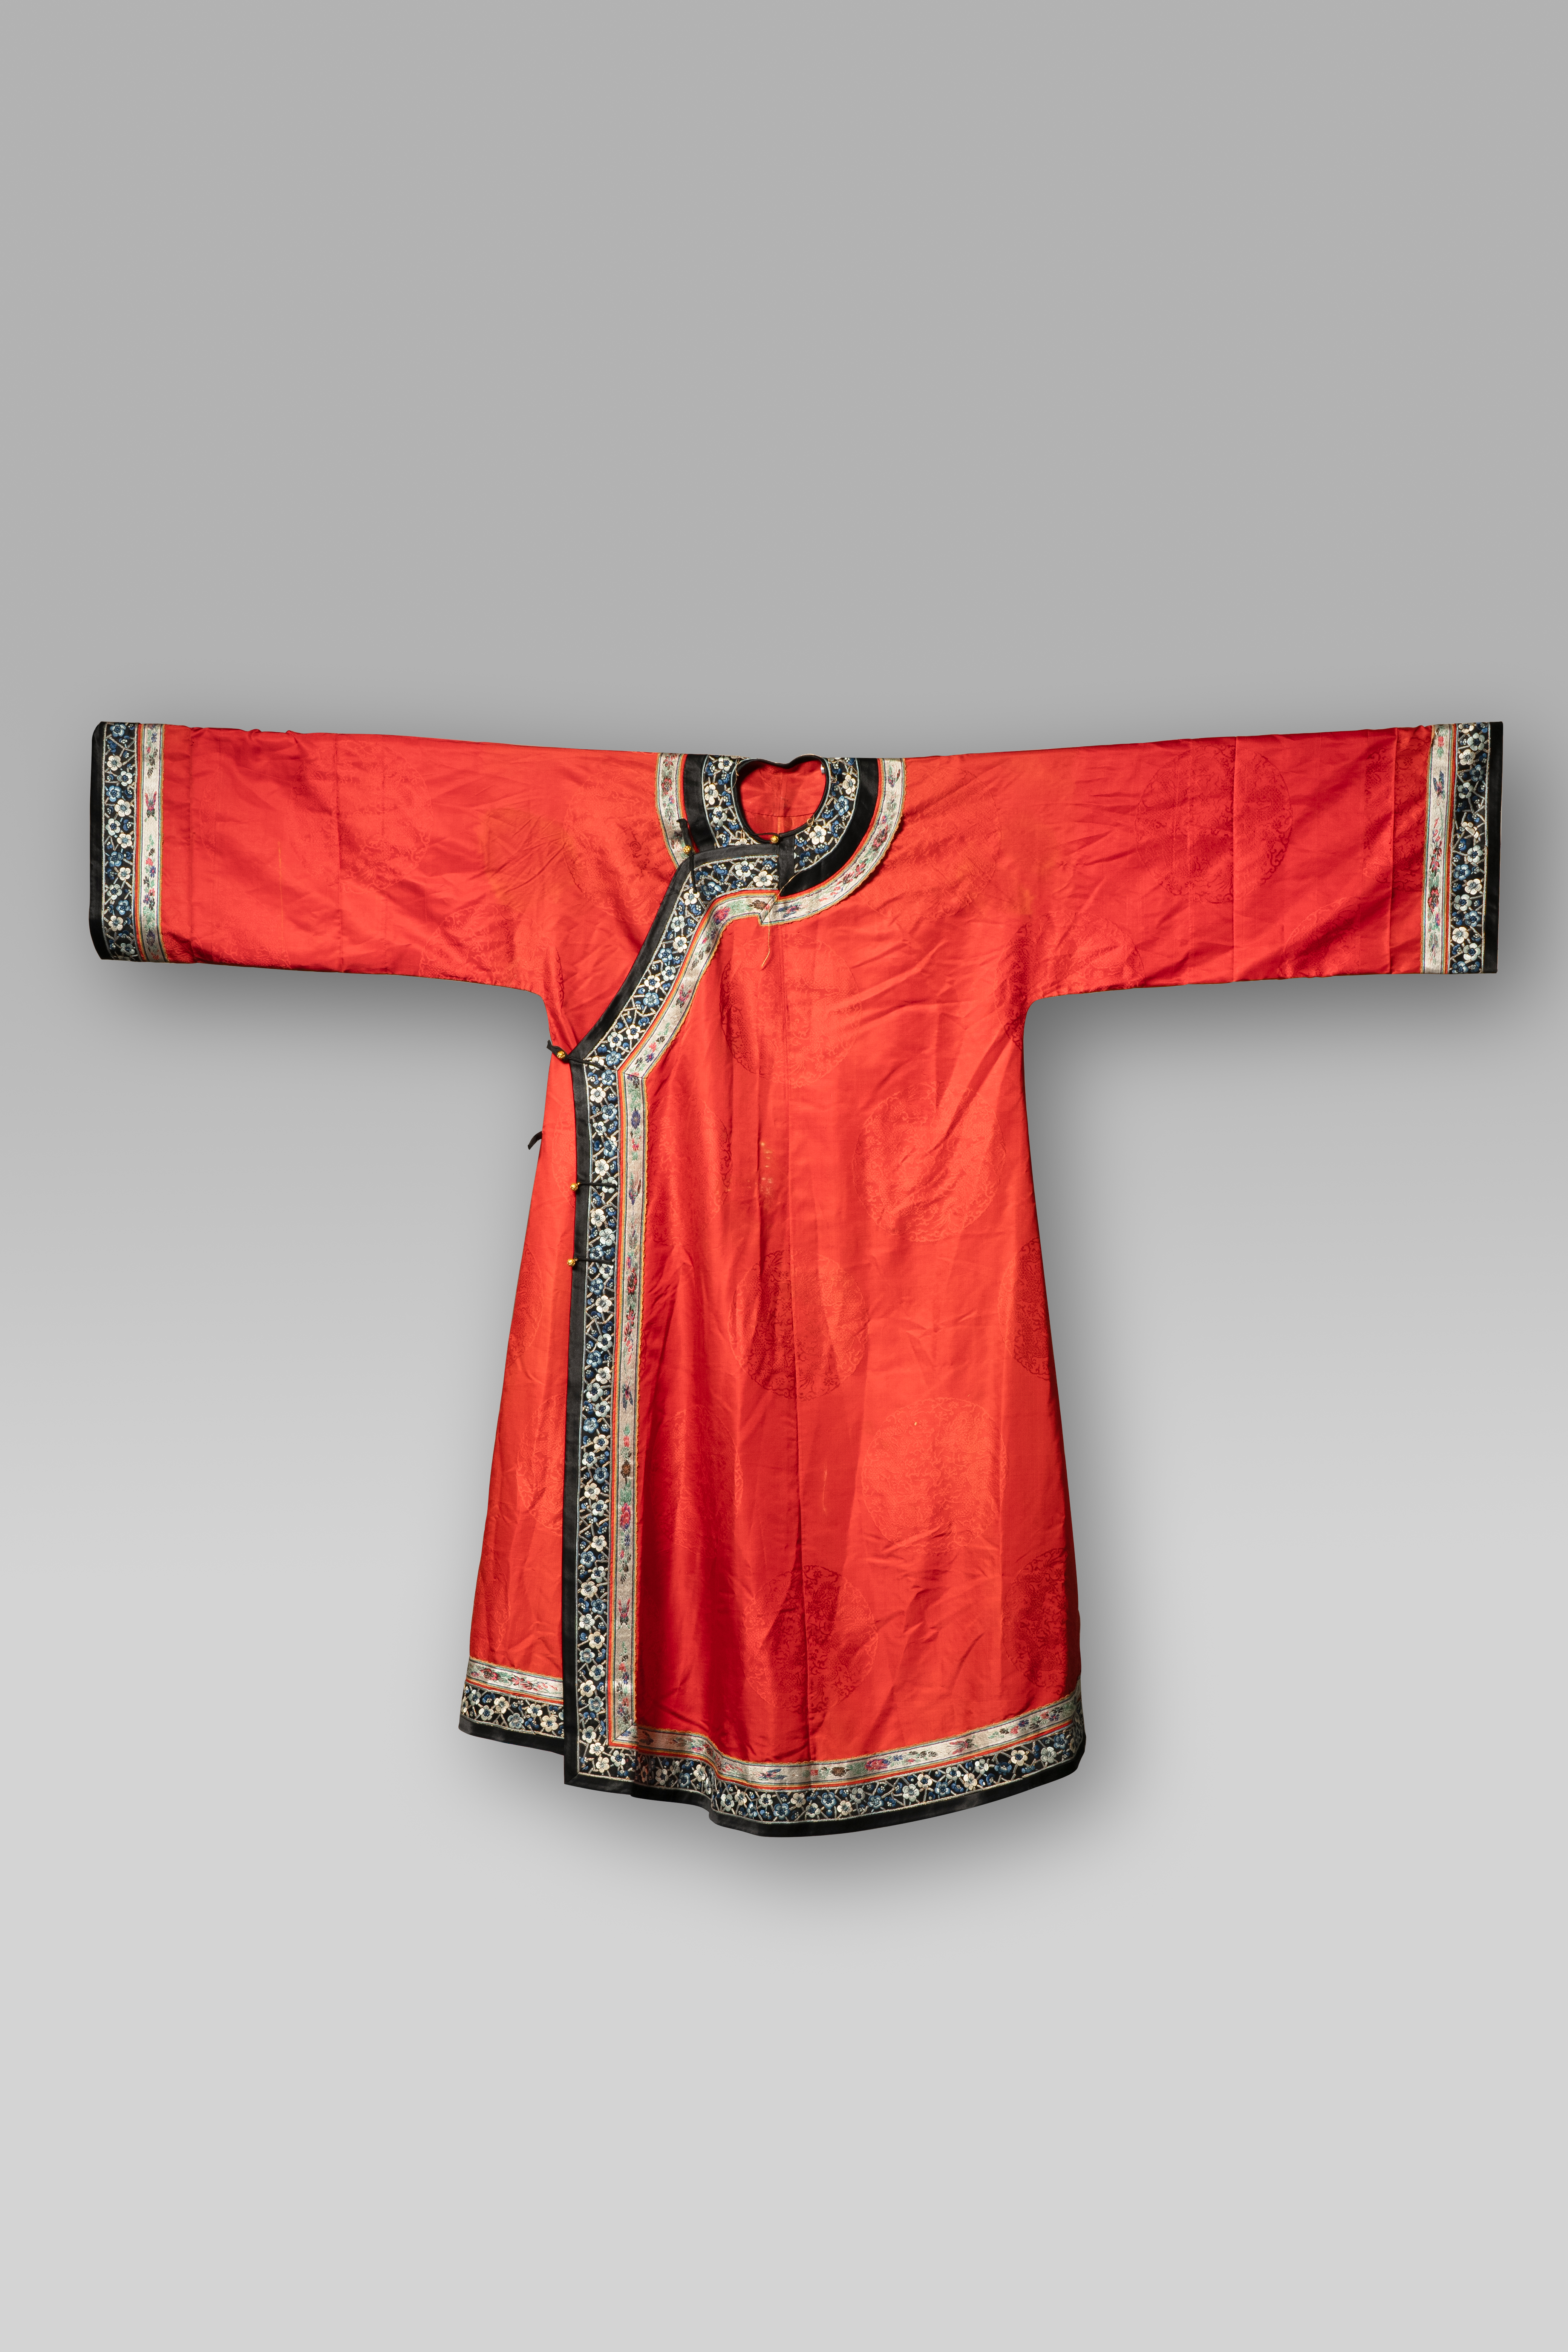 A CHINESE RED SILK 'DRAGON' ROBE